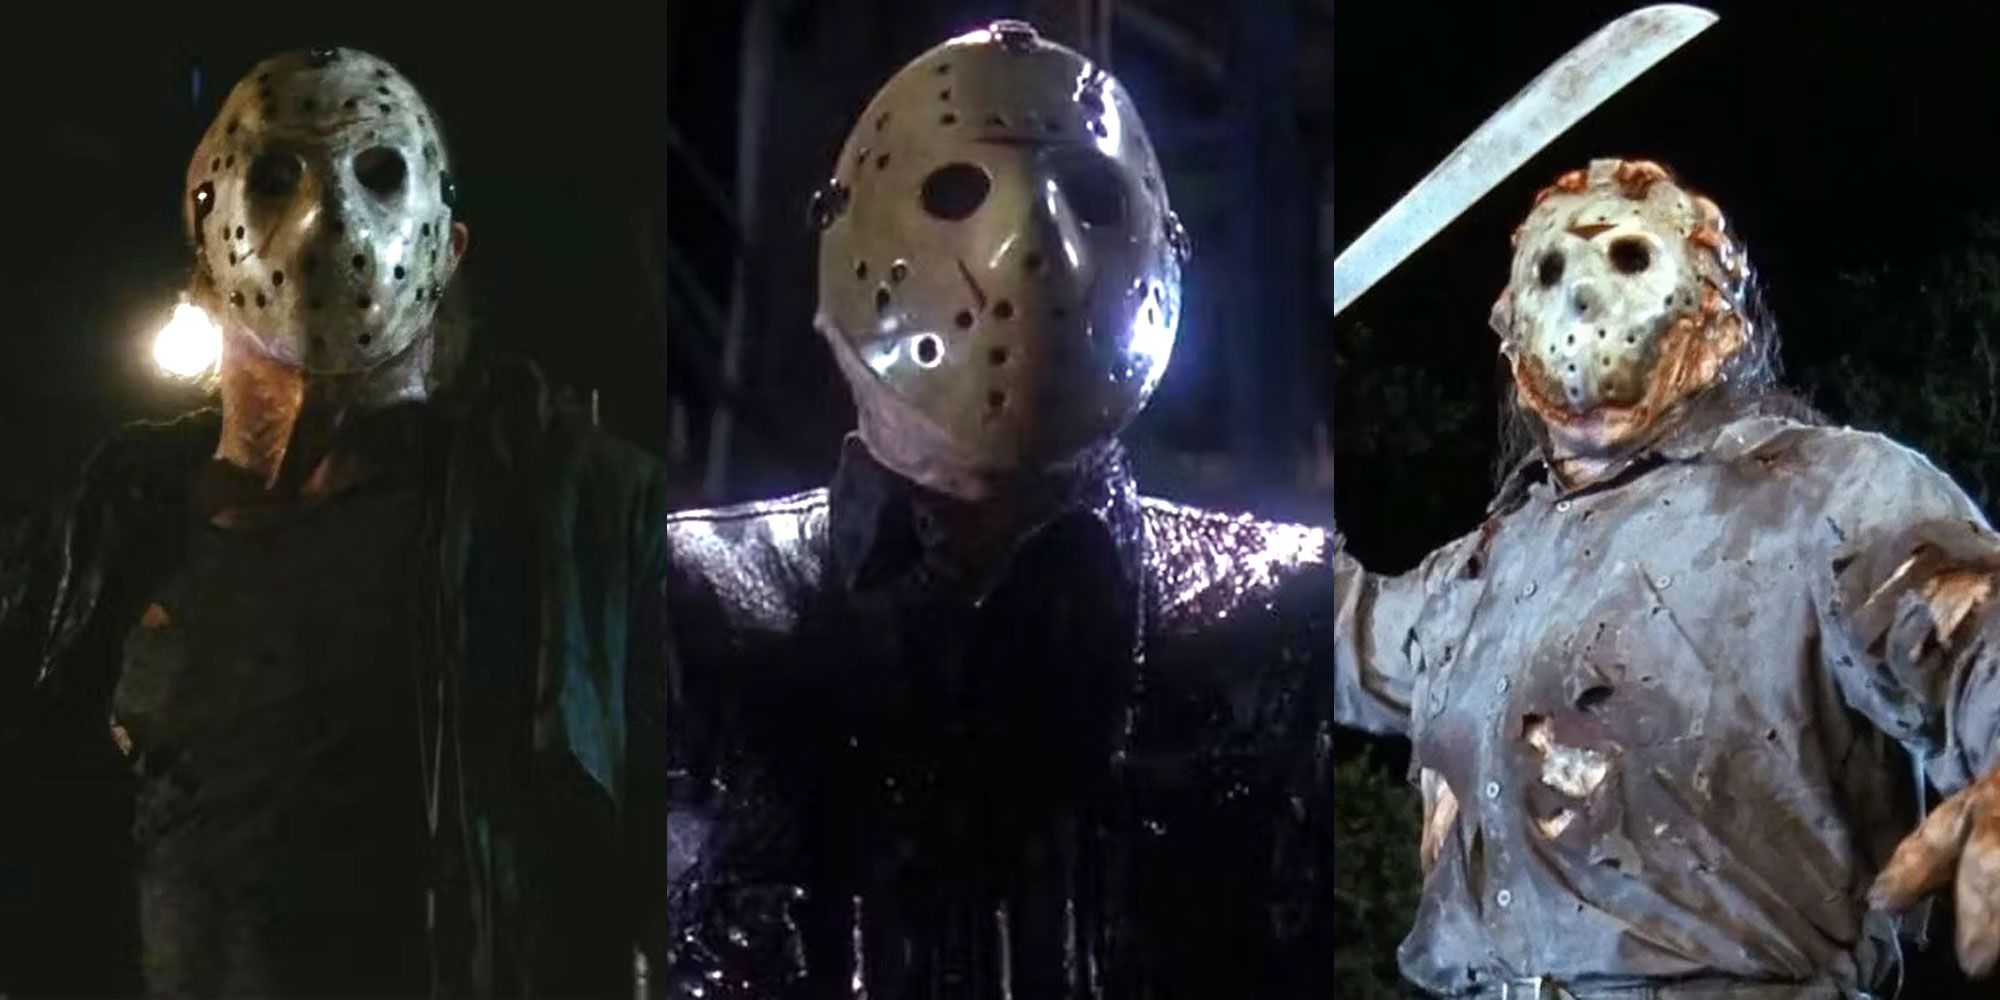 Fashion Friday The 13th: All Of Jason Voorhees' Looks, Ranked